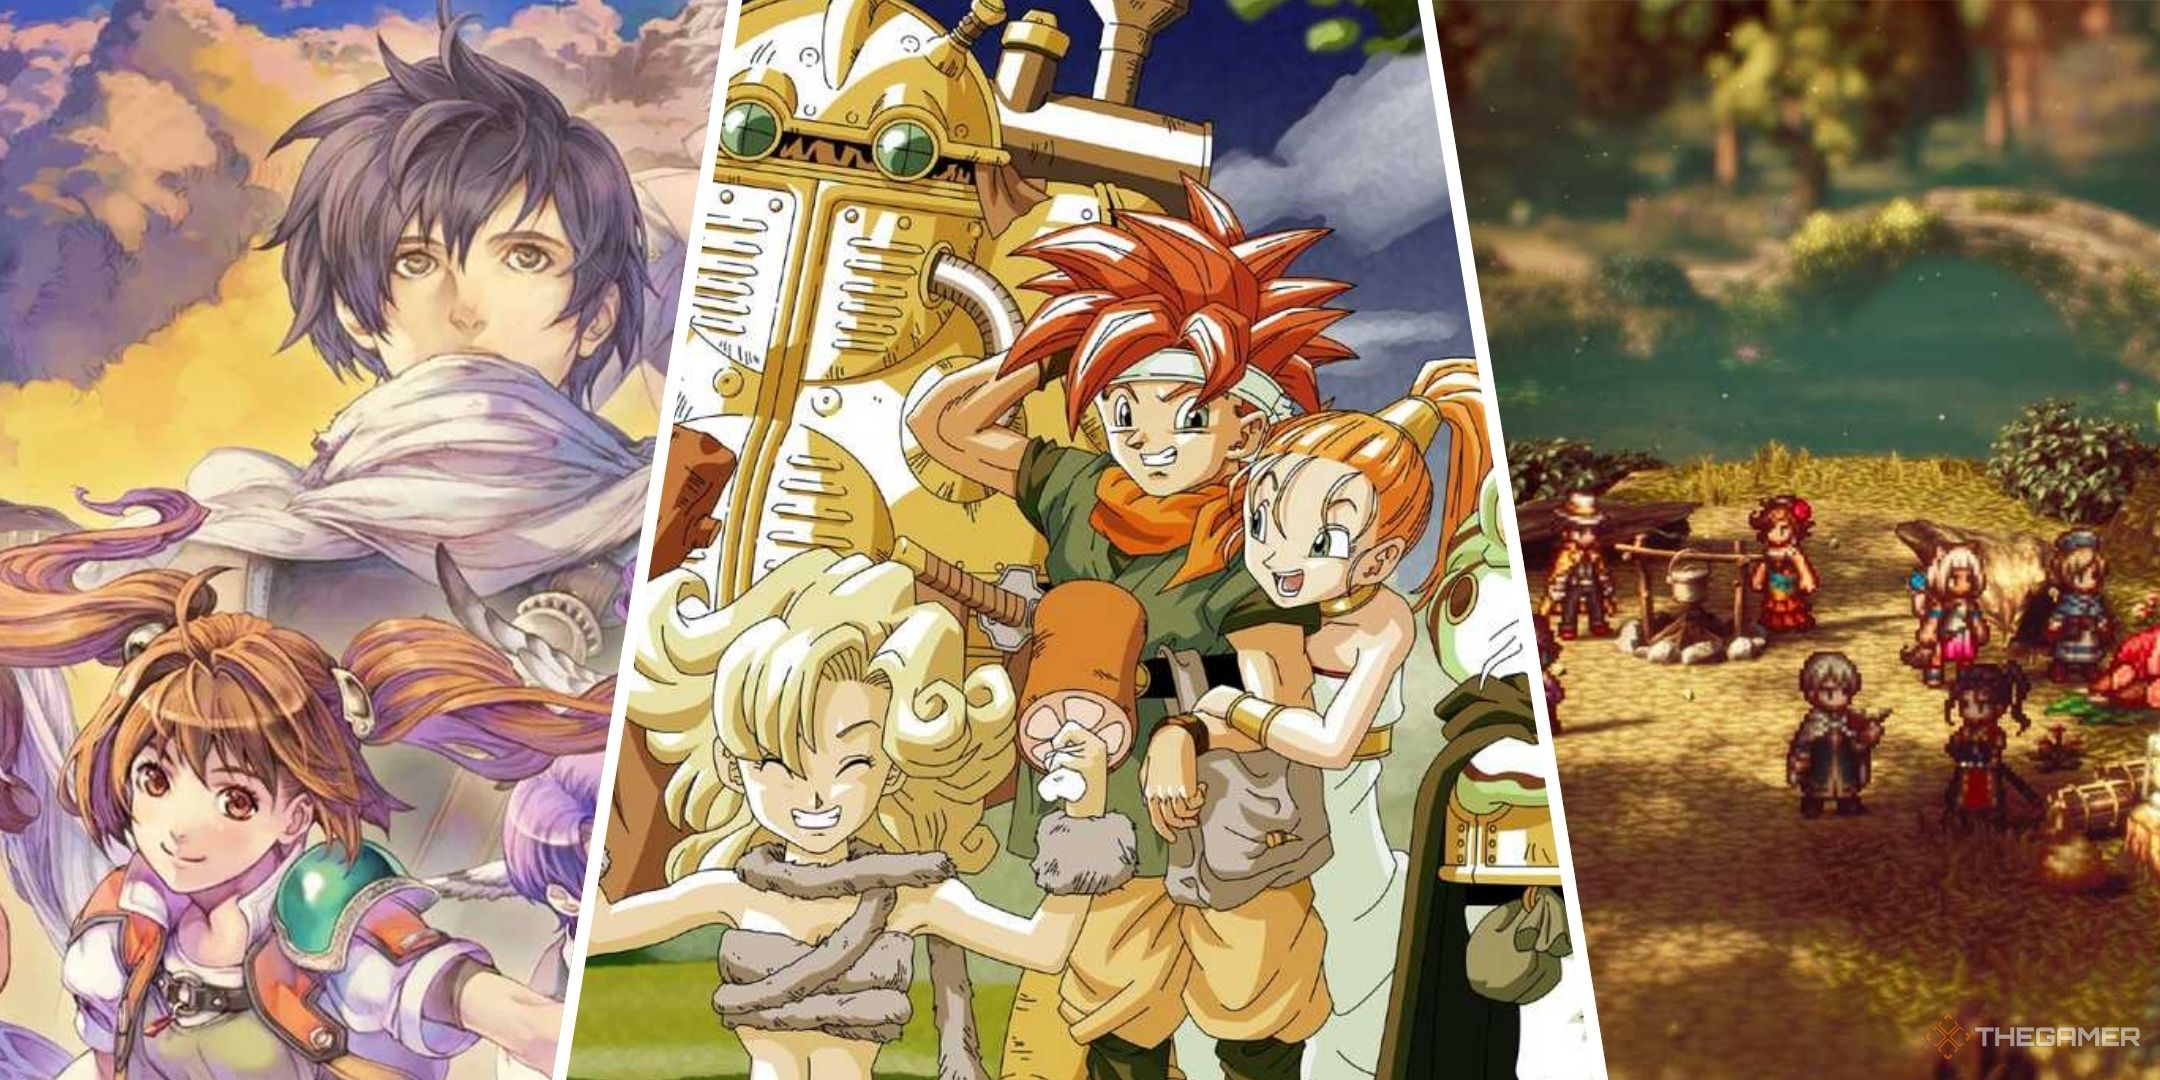 Split images of The Legend Of Heroes Trails In The Sky, Chrono Trigger, and Octopath Traveler 2